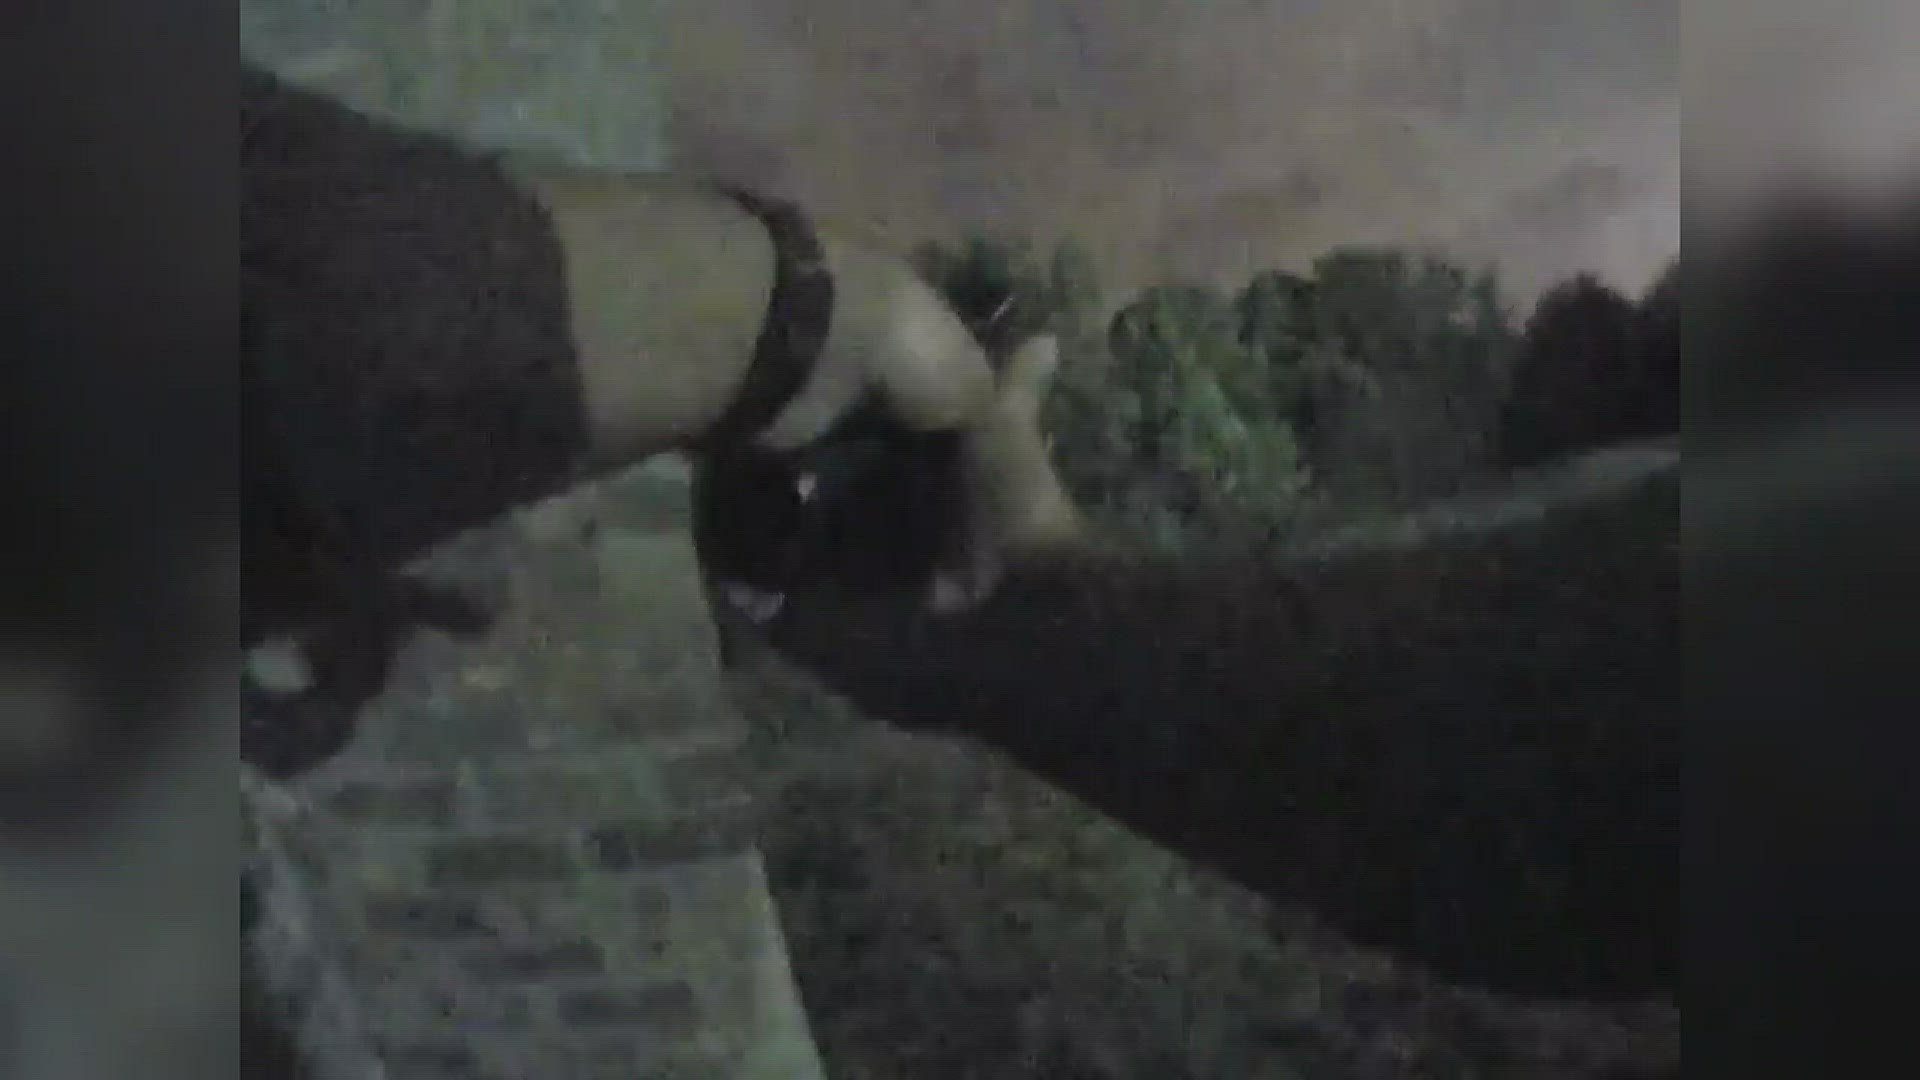 Nopd Ushers In New Video Policy With Release Of Fatal Shooting Footage 9642